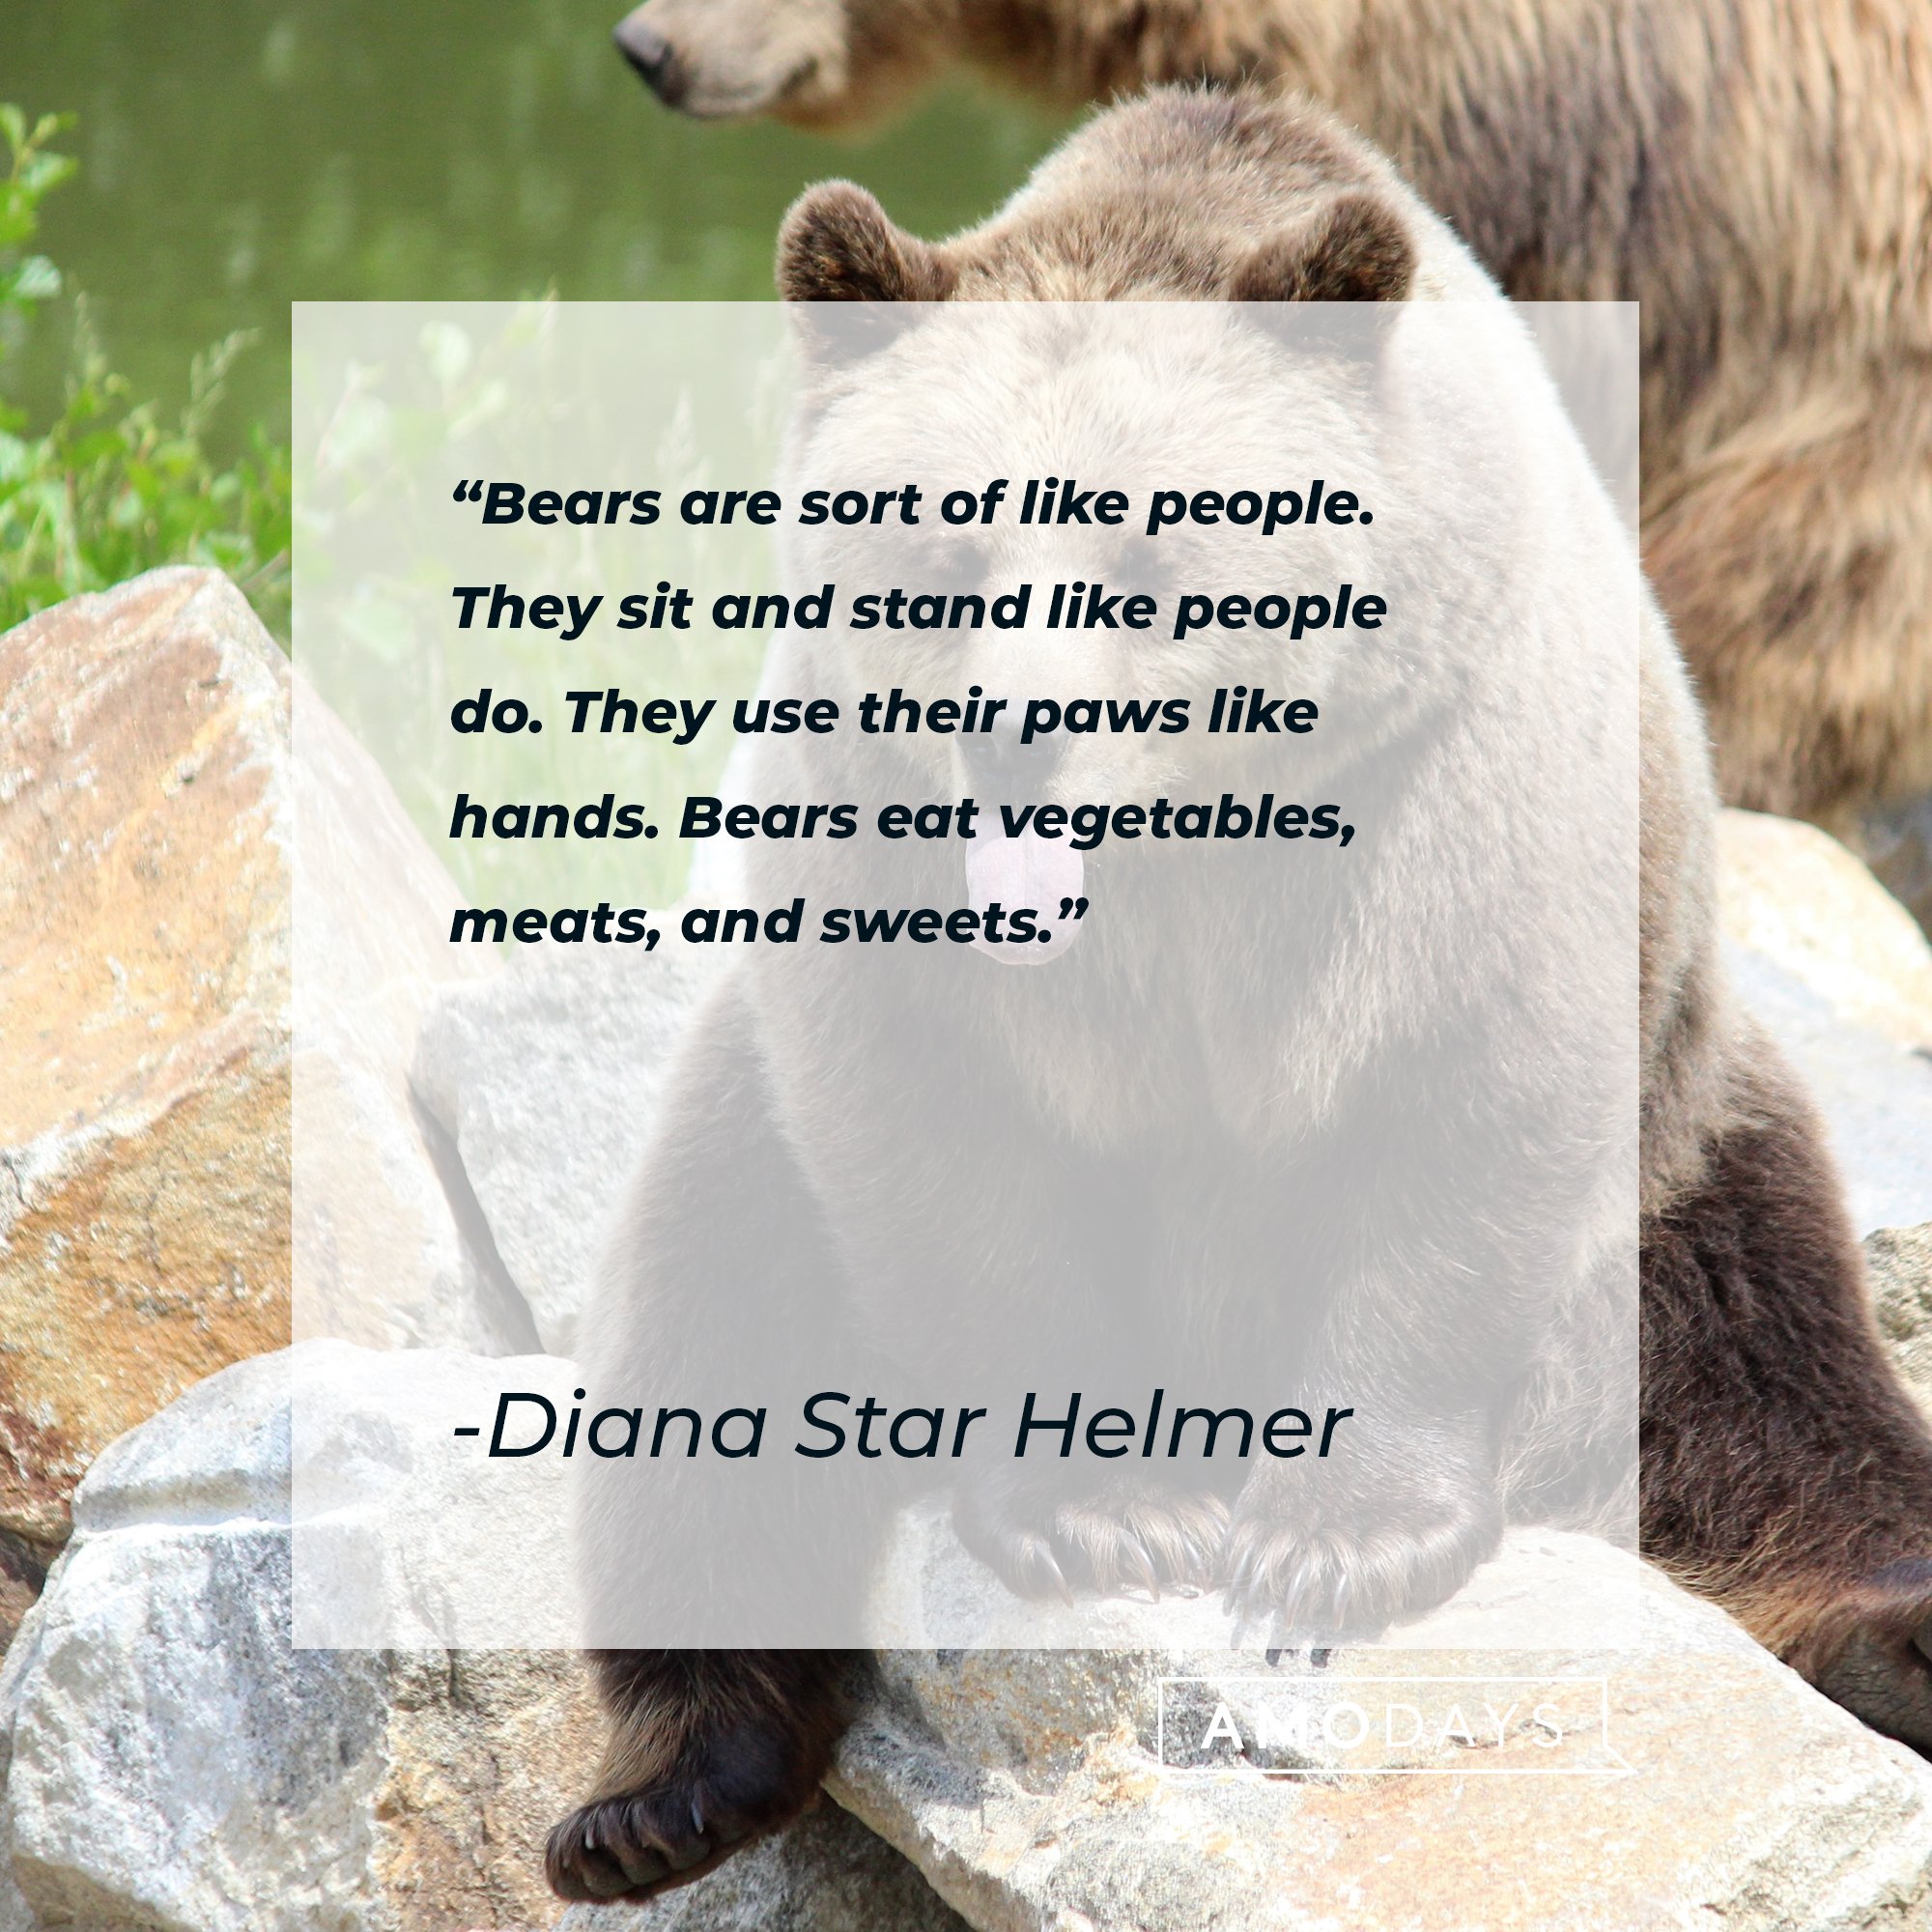 Diana Star Helmer's quote: “Bears are sort of like people. They sit and stand like people do. They use their paws like hands. Bears eat vegetables, meats, and sweets."  | Image: AmoDays